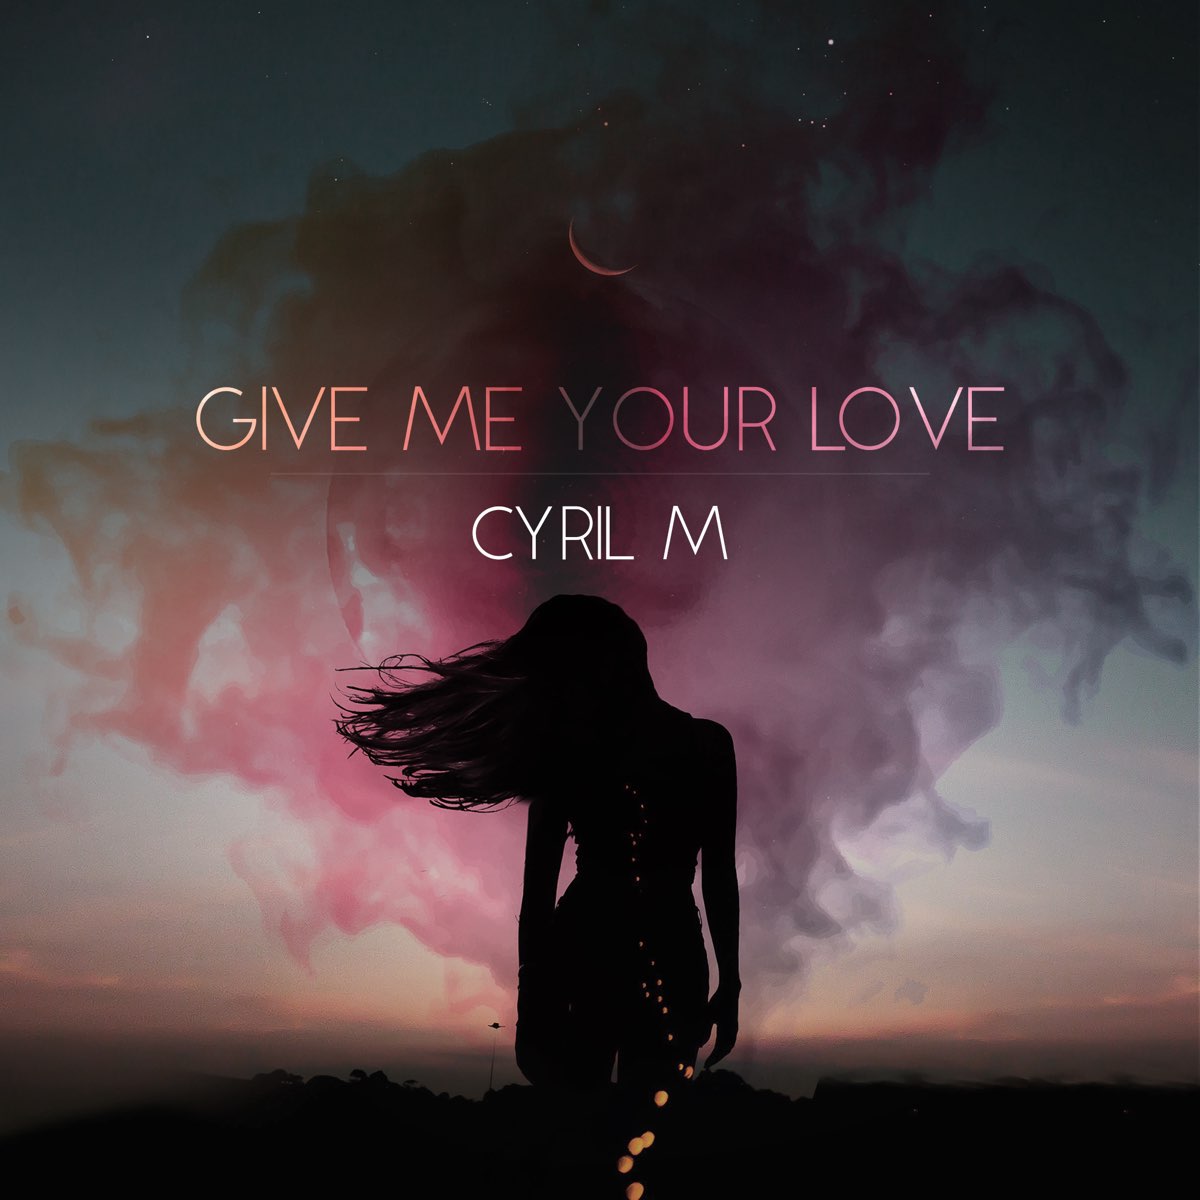 Remix love 1. Give me. Give me your Love. Cyril Remix. Your Love Remix.